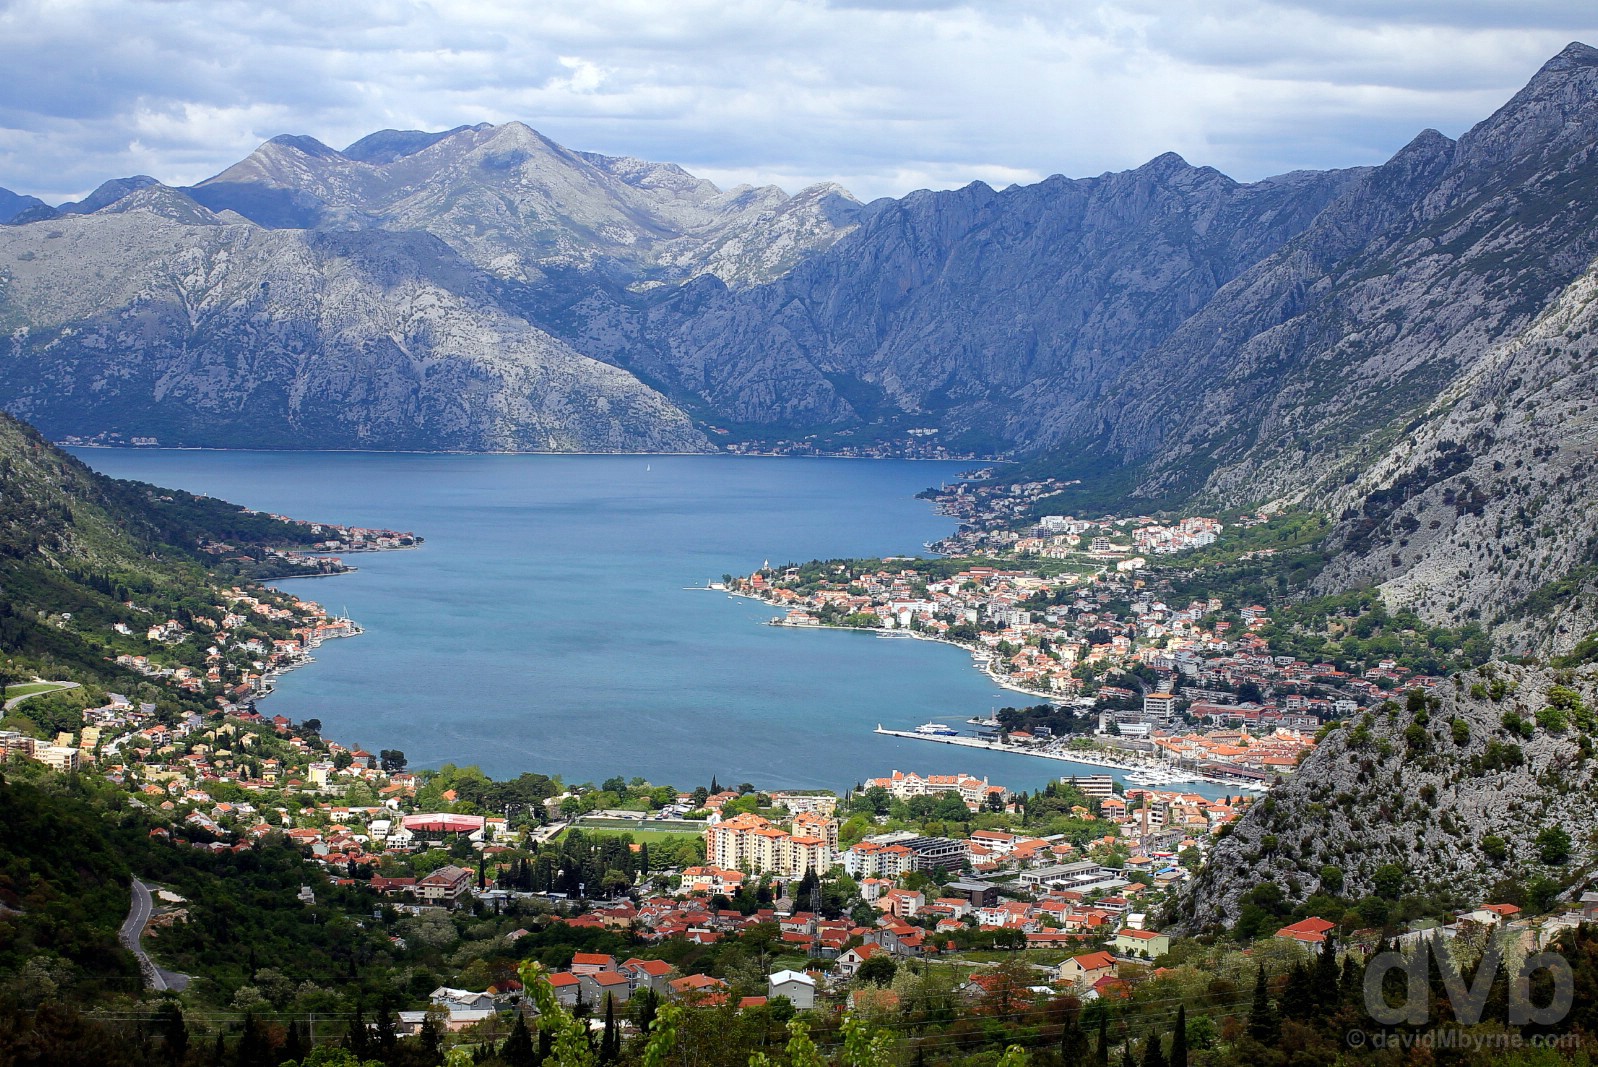 Kotor & the Bay of Kotor as seen from the road to Lovcen National Park, Montenegro. April 20, 2017. 